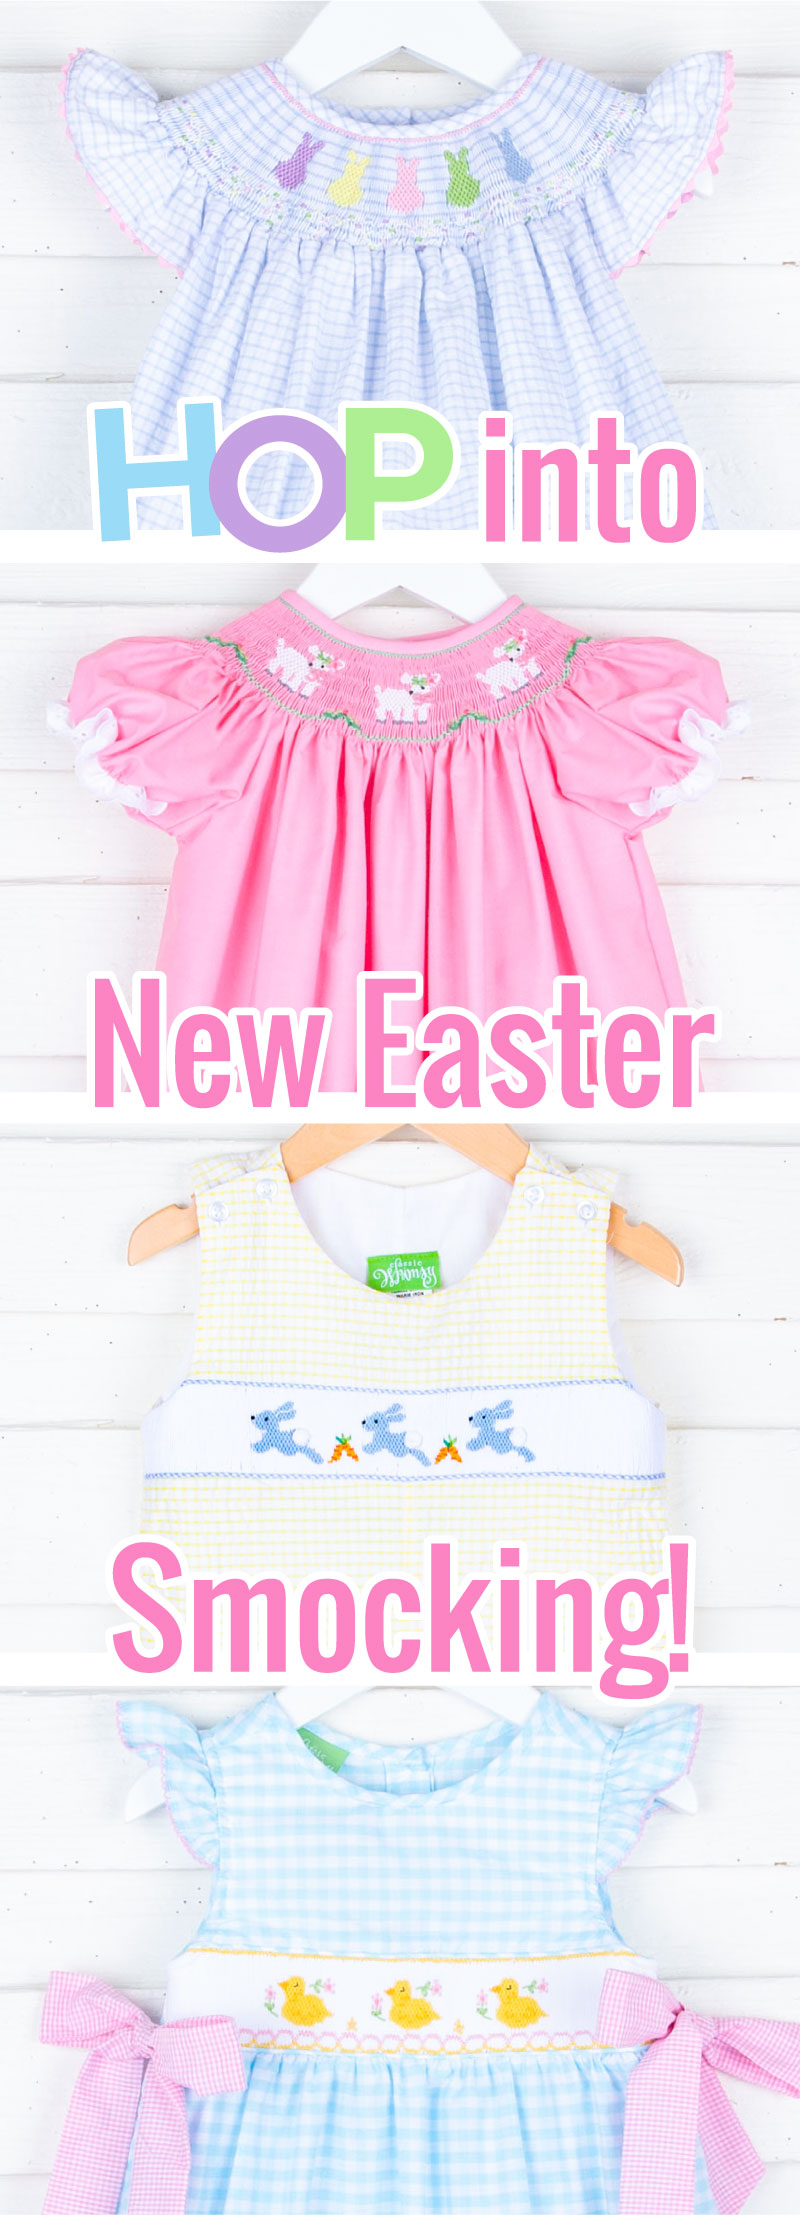 Hop into new Easter smocking!